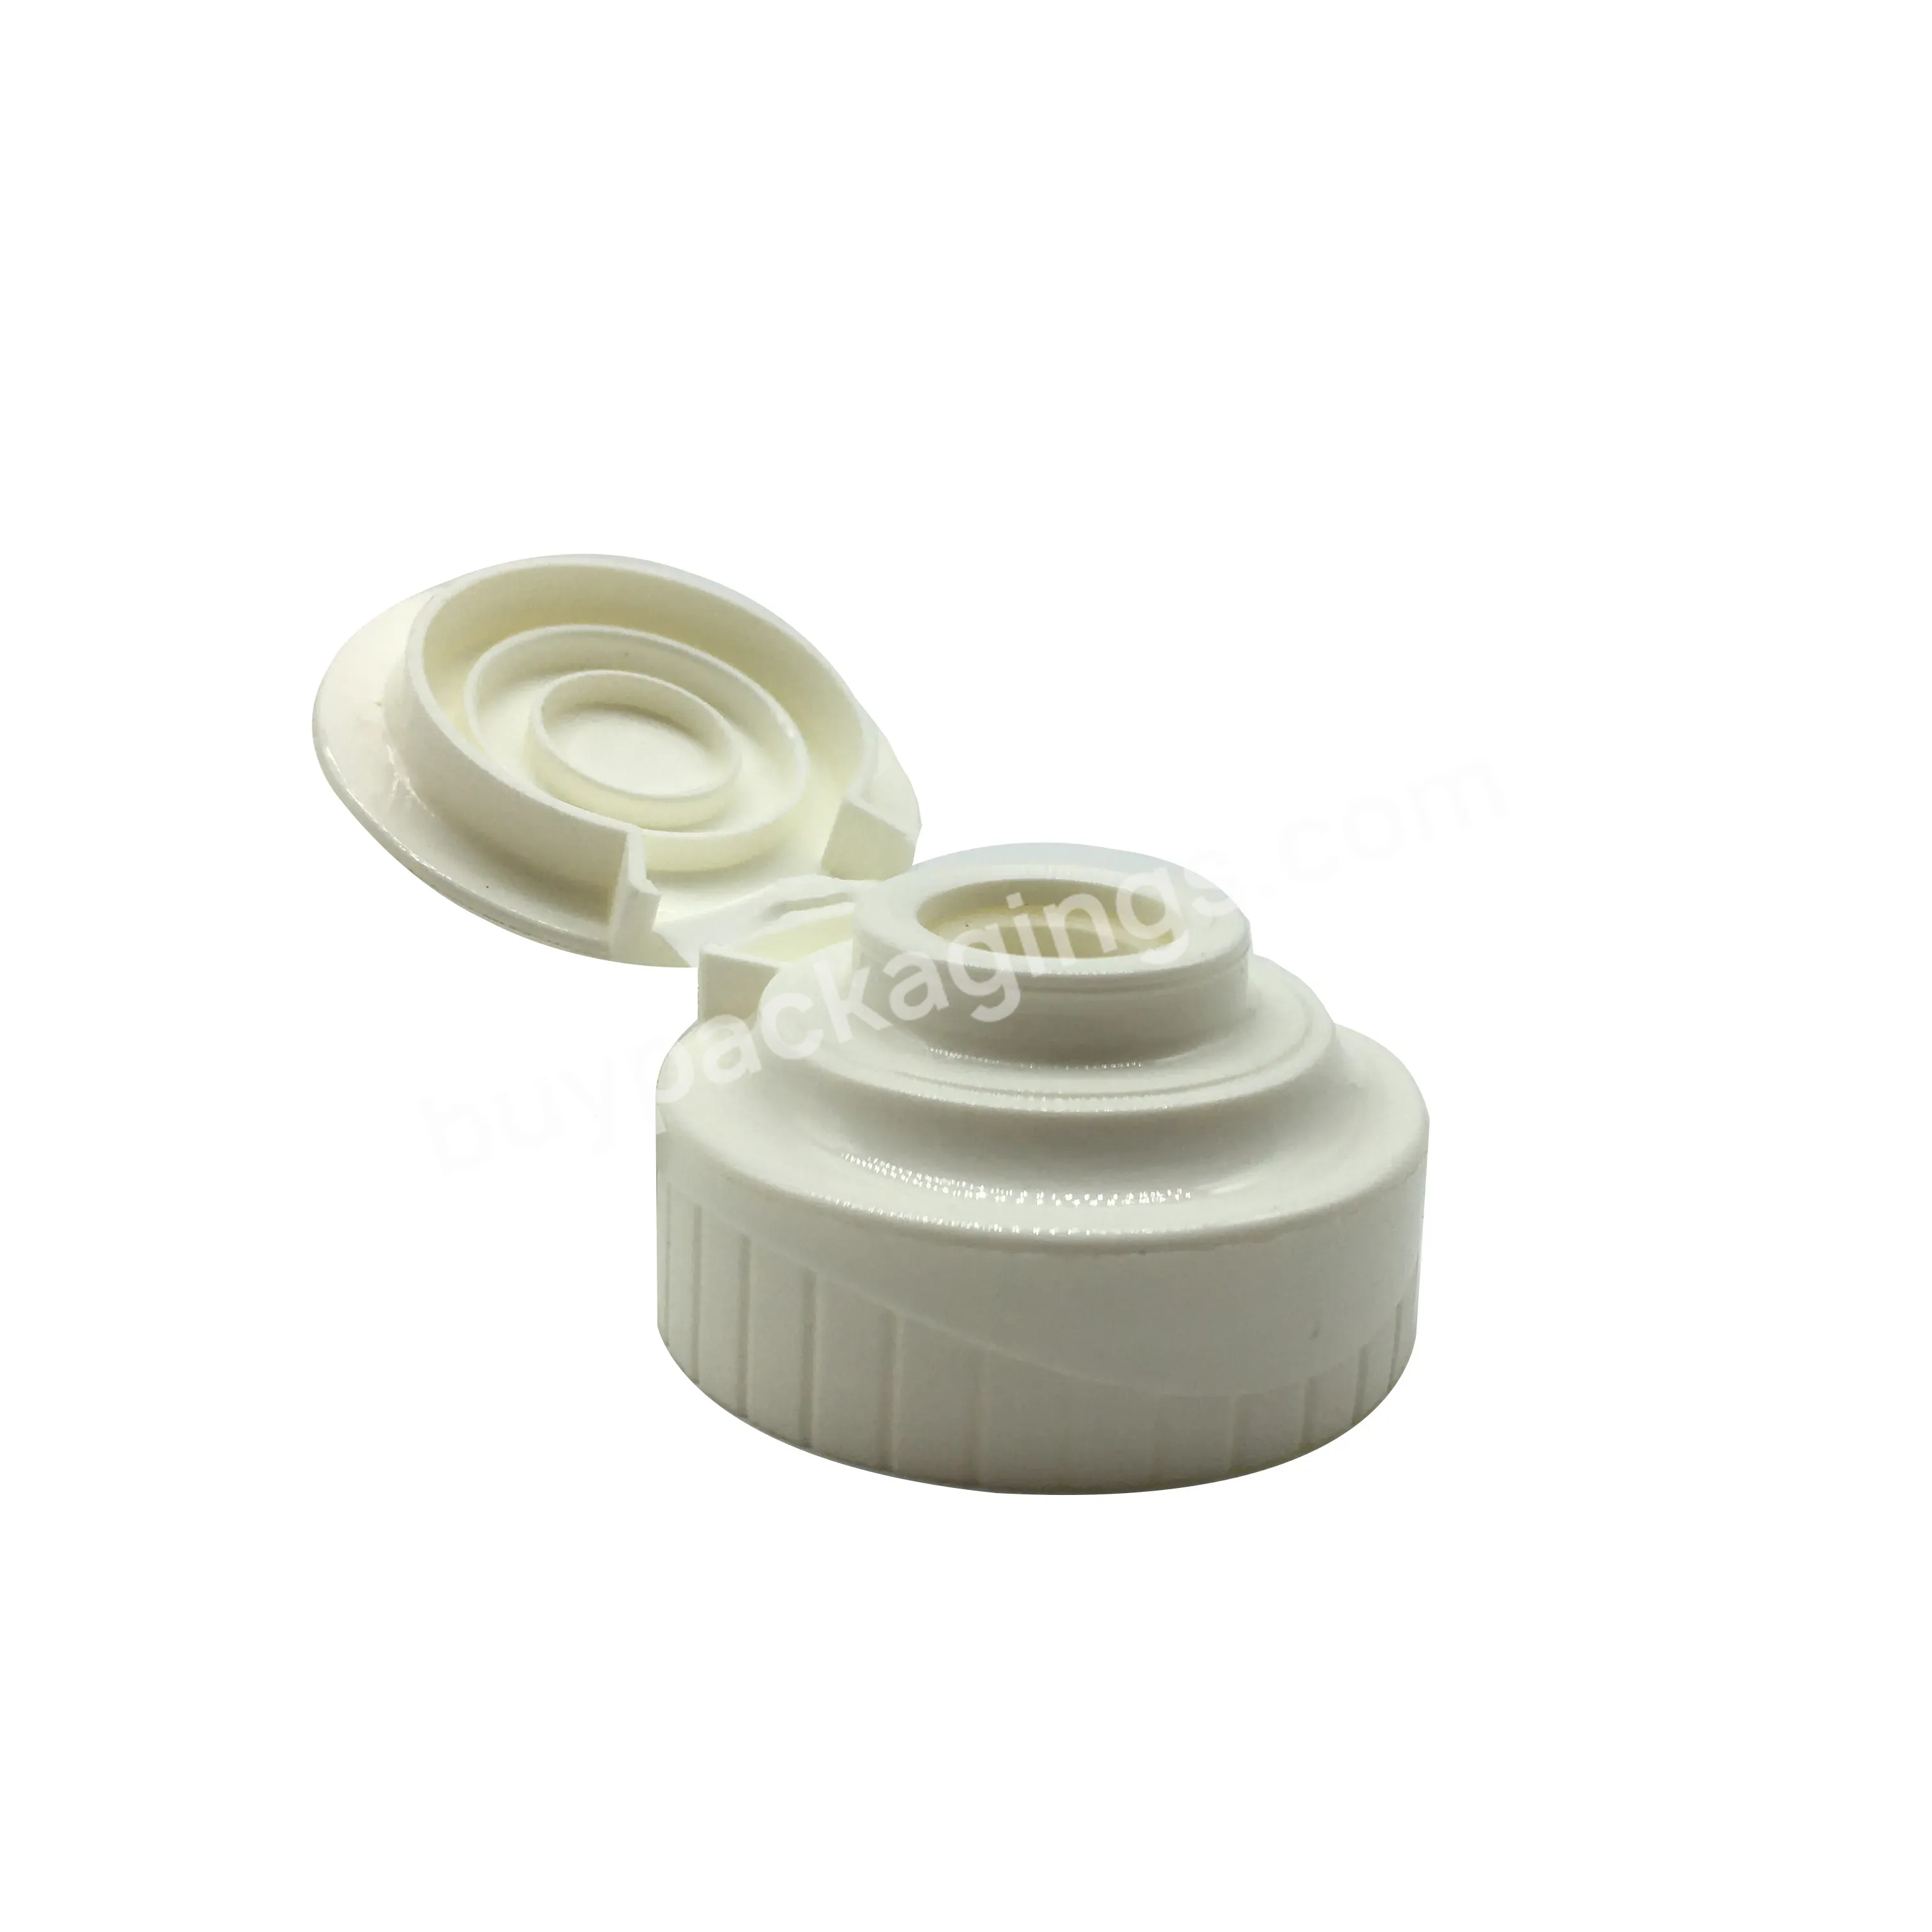 28/400 Plastic Pp Flip Top Cap With Silicone Value For Sauce Honey Bottles